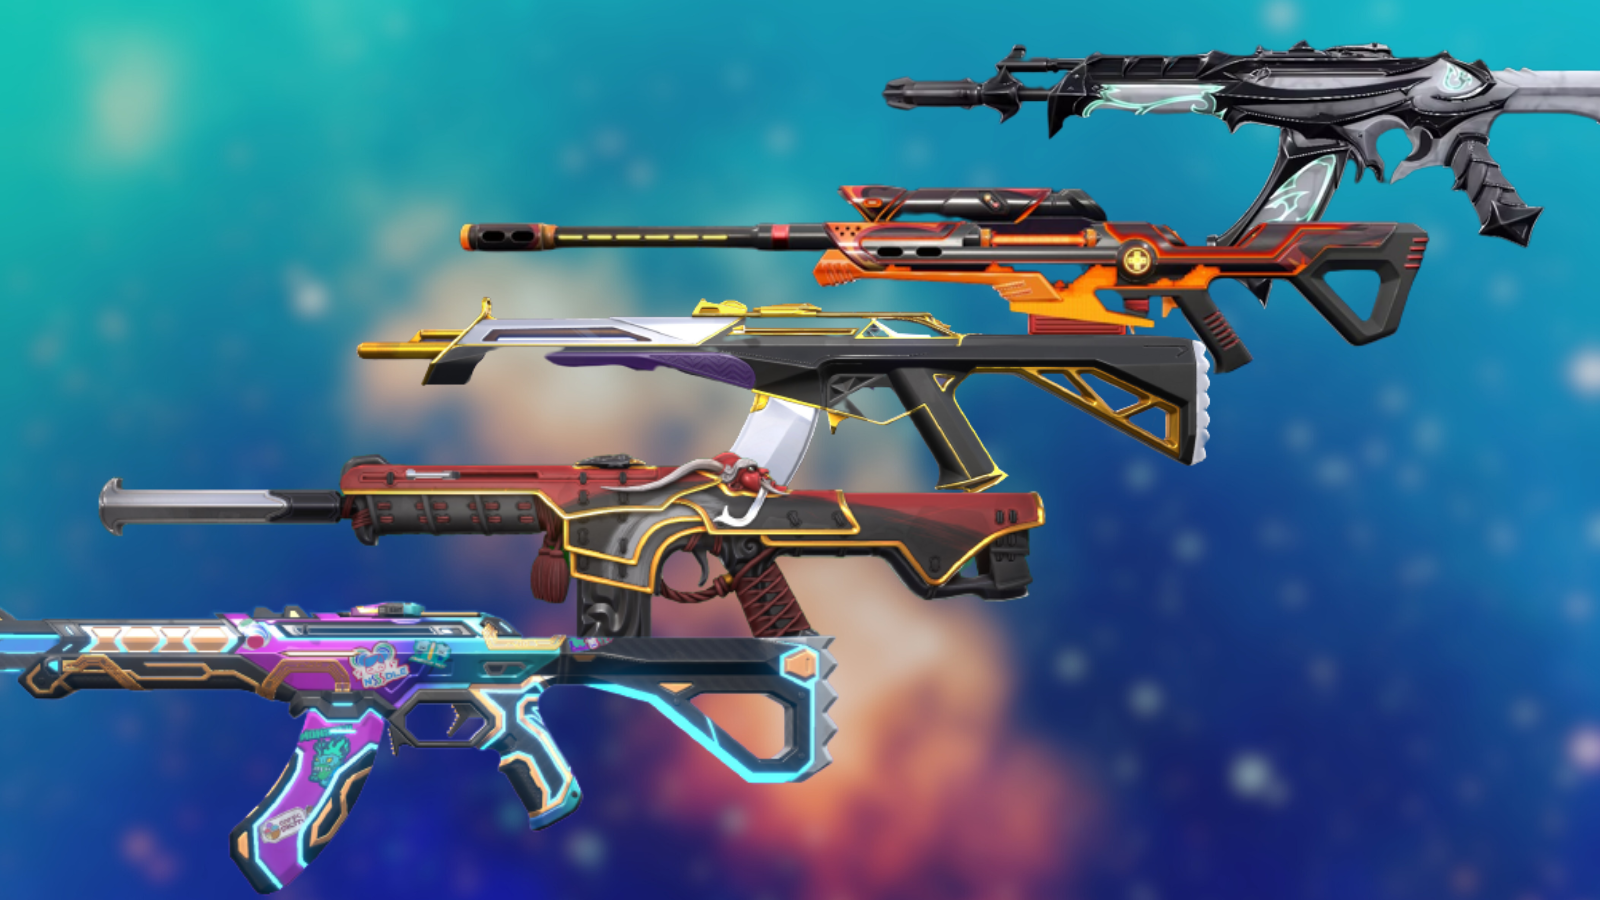 VALORANT Arsenal: Choose your weapon and view weapon details